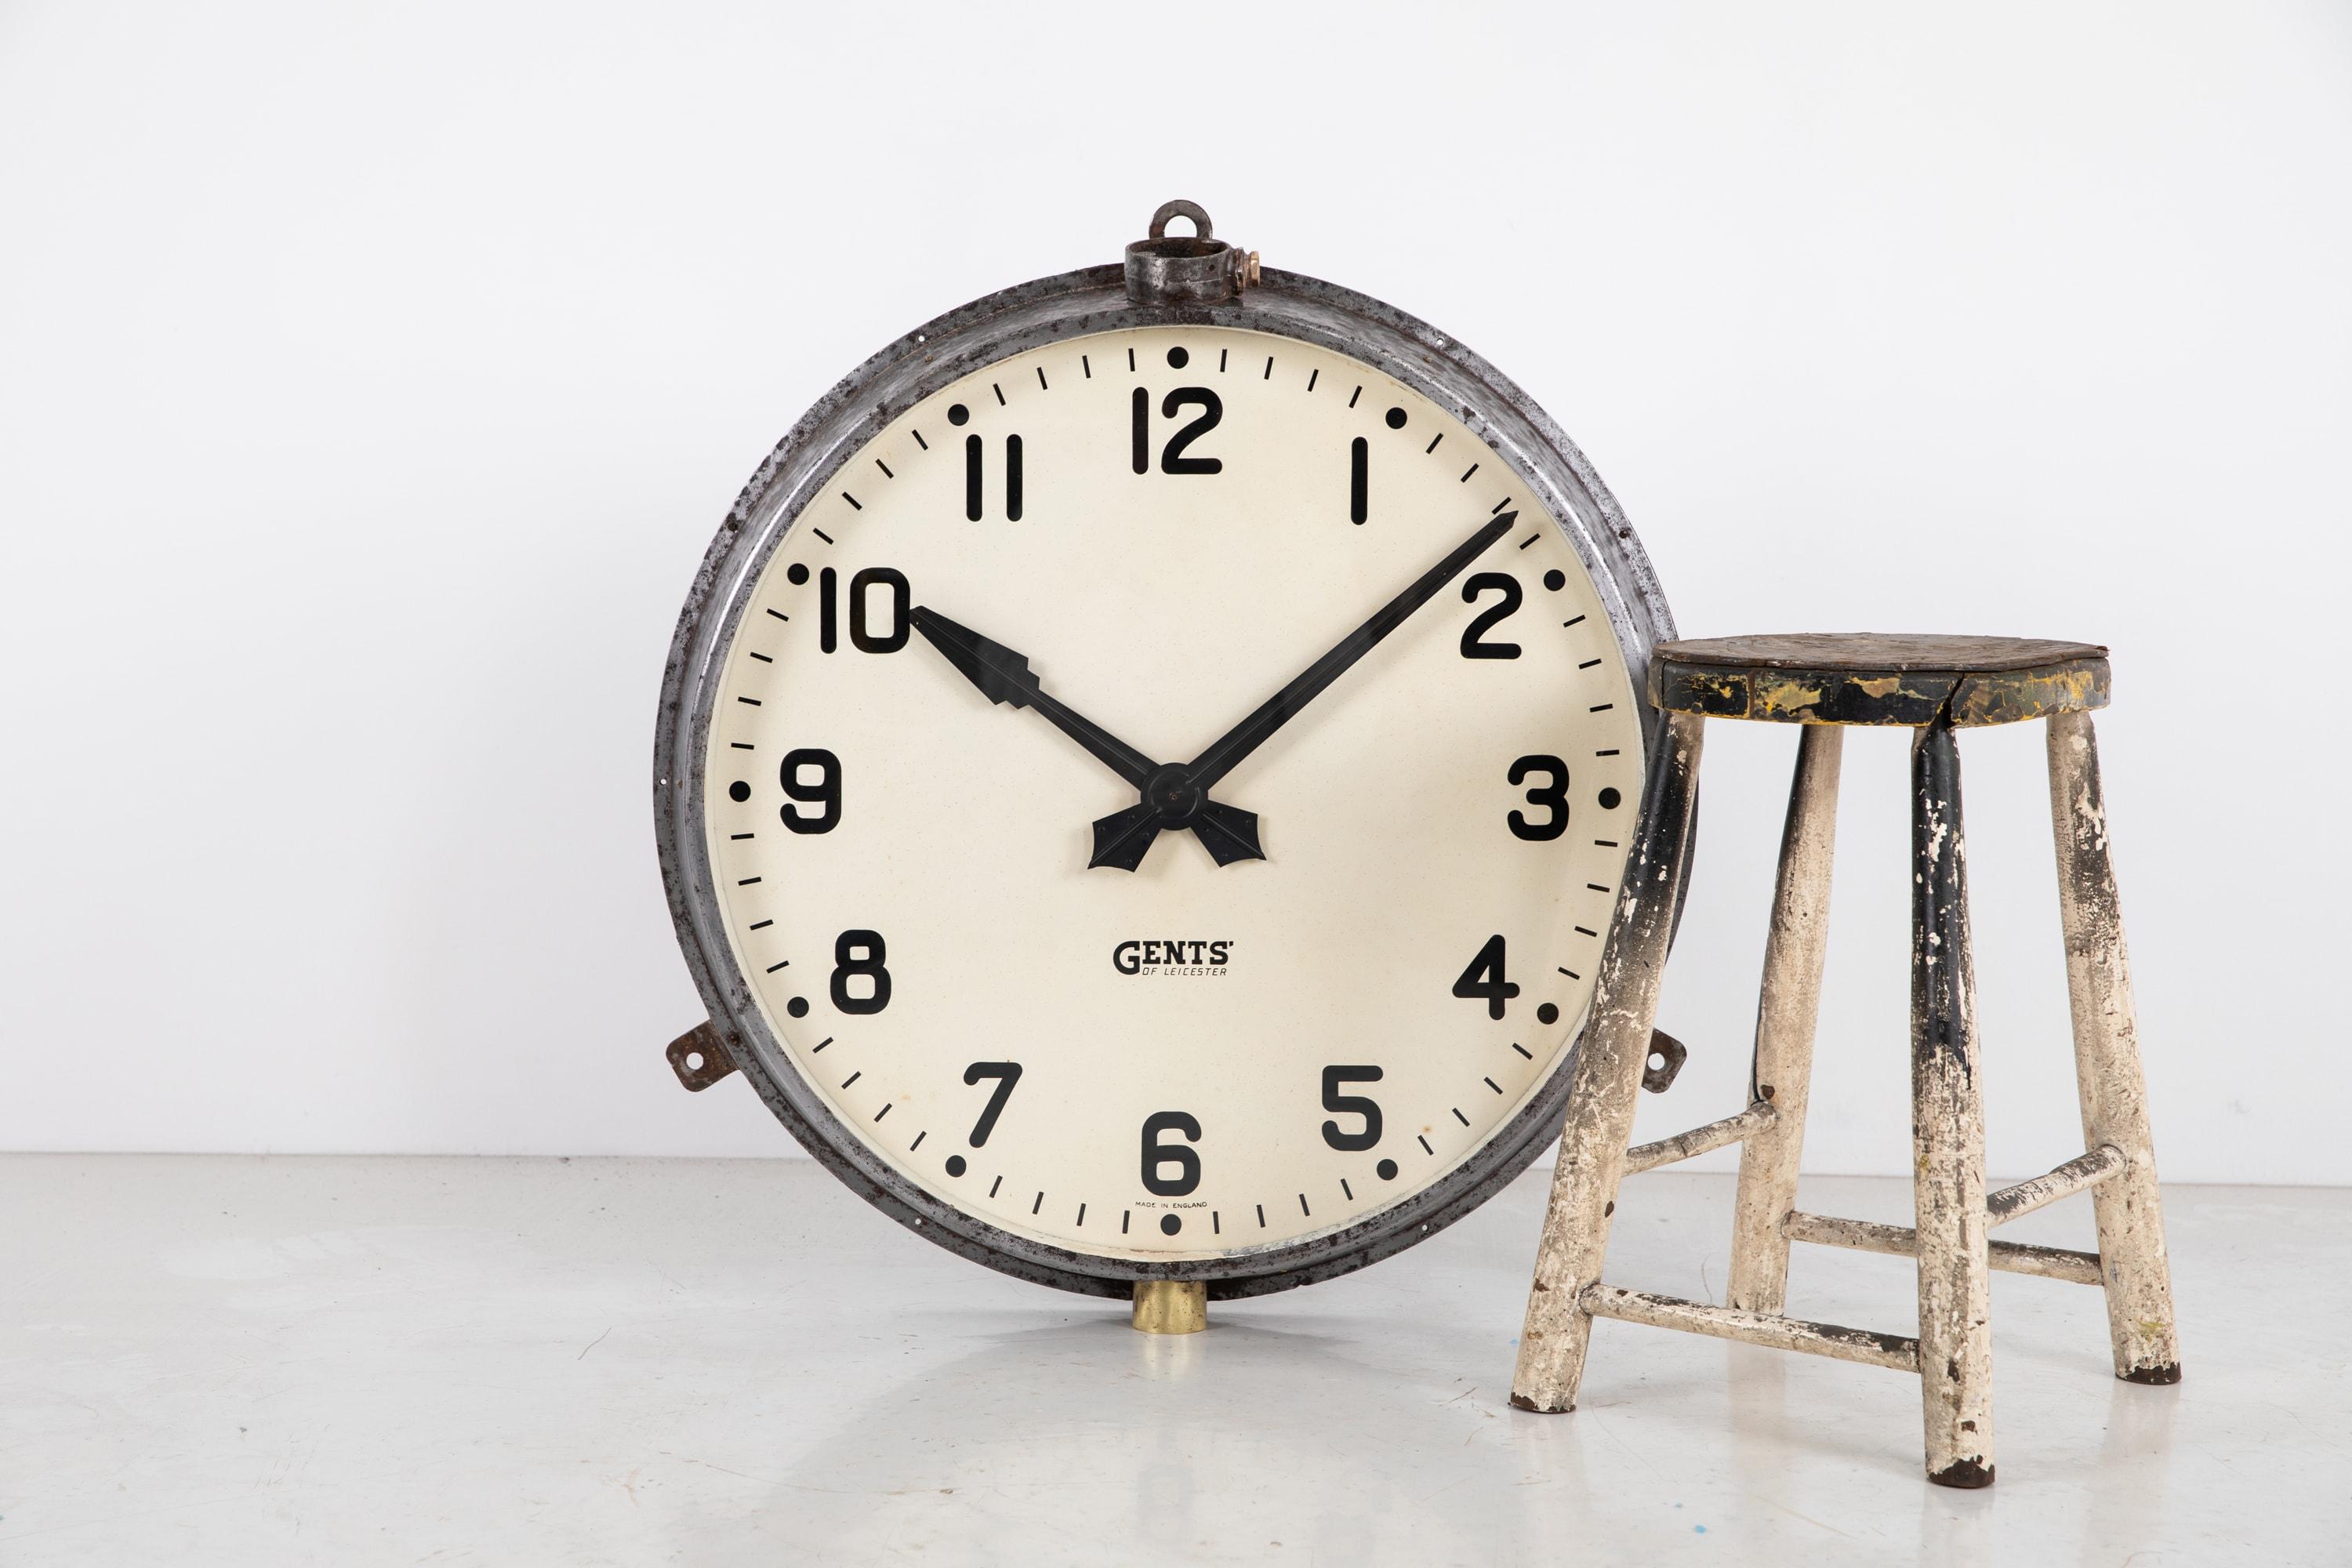 Vintage Industrial Gents of Leicester Factory Railway Wall Clock, circa 1930 1